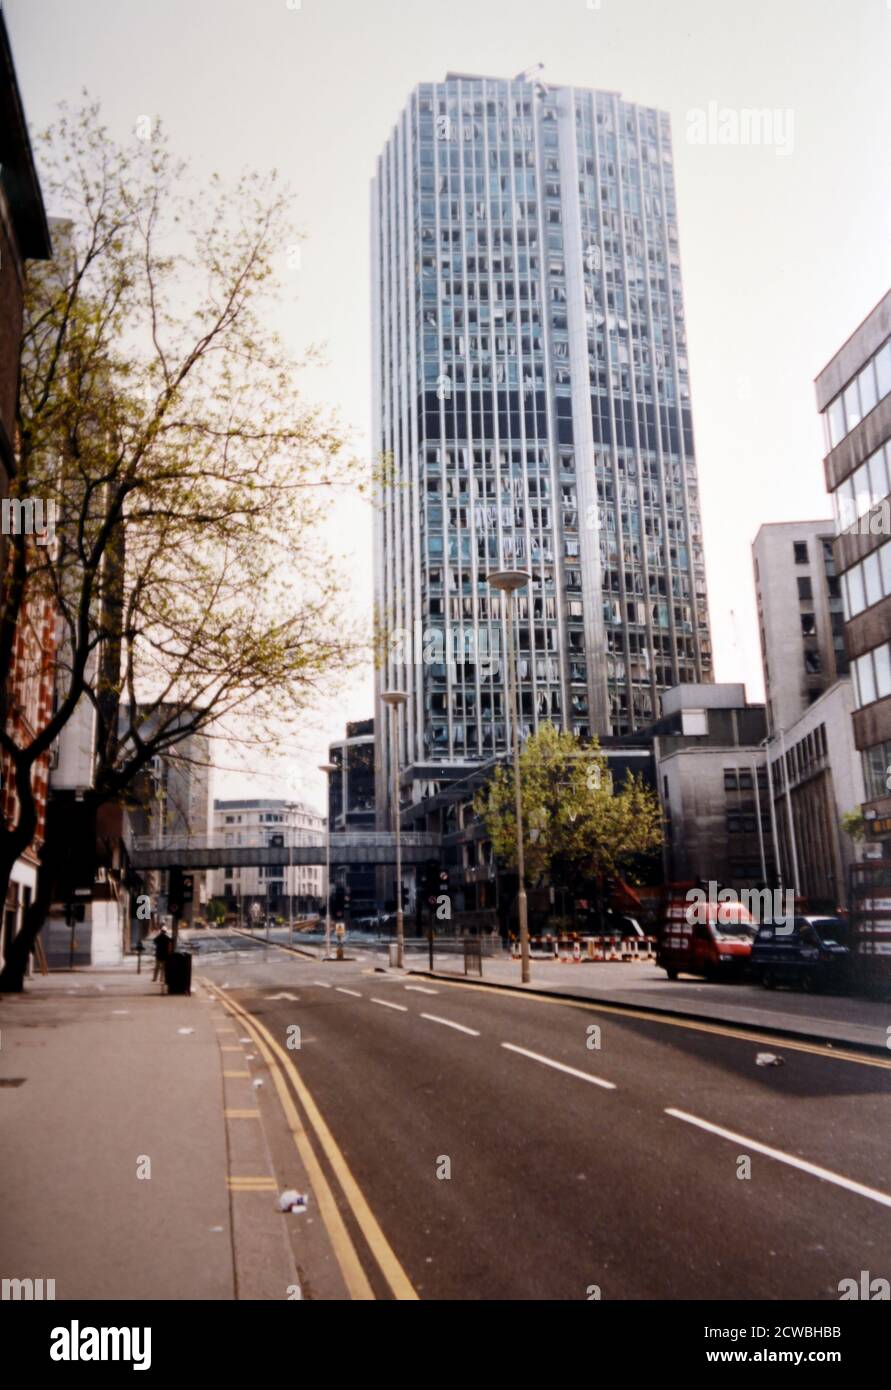 Photograph taken after the 1993 Bishopsgate bombing, when the Provisional Irish Republican Army detonated a powerful truck bomb on Bishopsgate, a major thoroughfare in London's financial district, the City of London Stock Photo